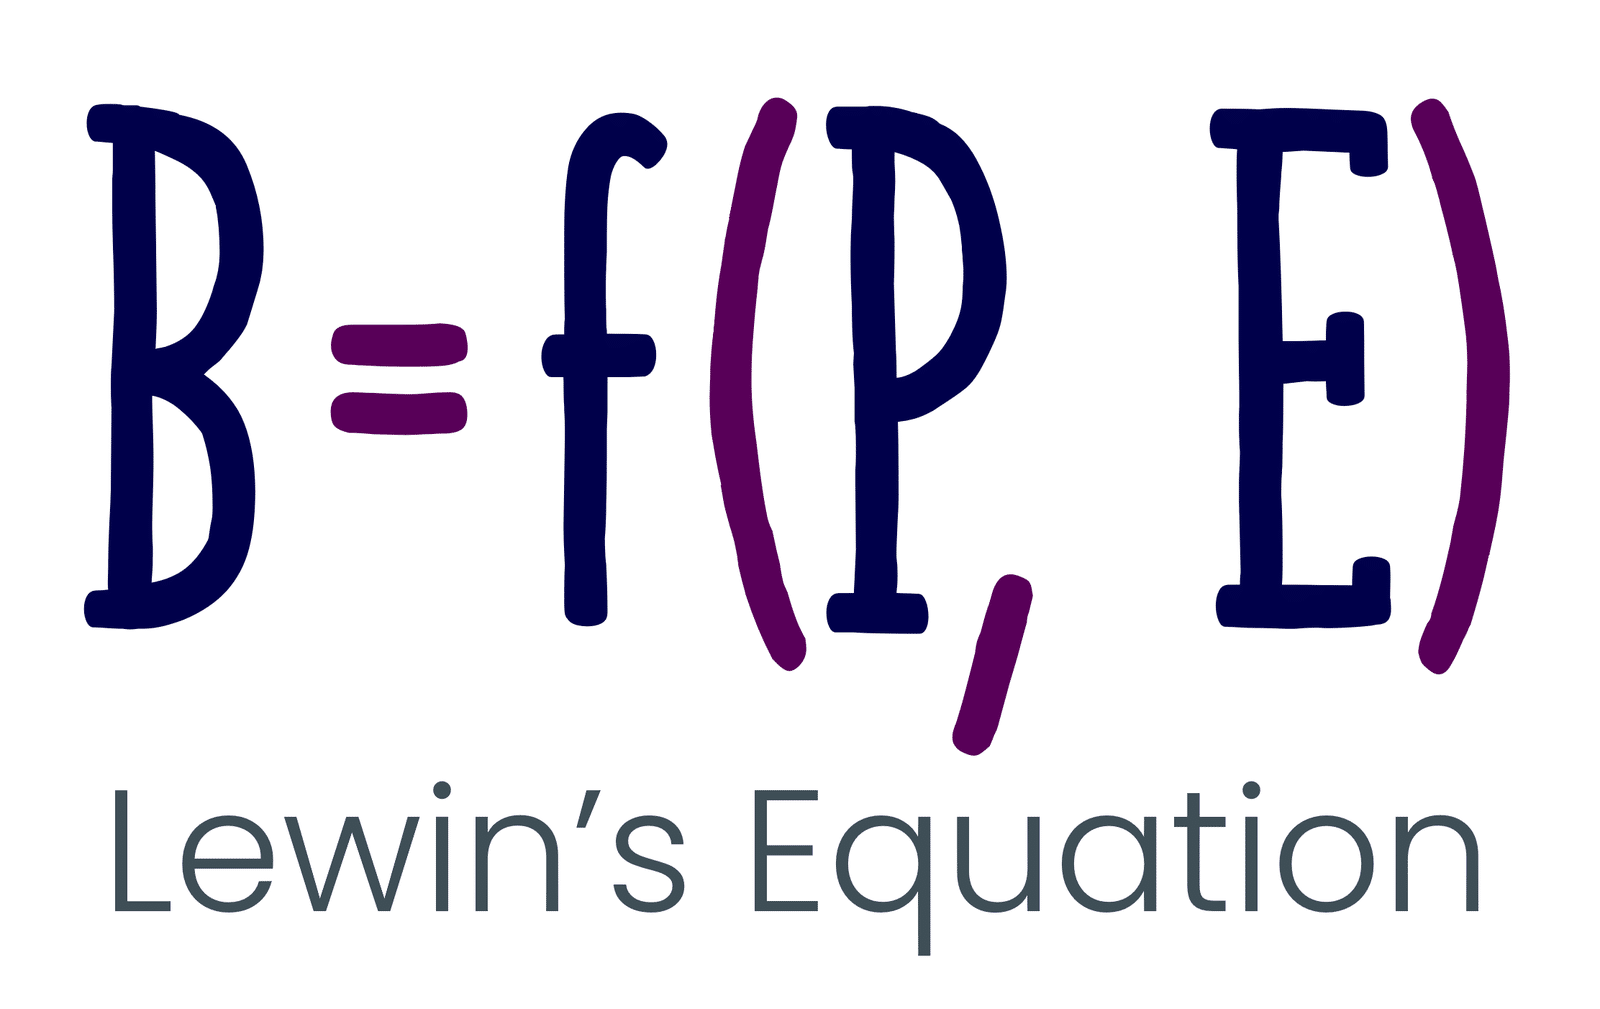 Lewin's Equation